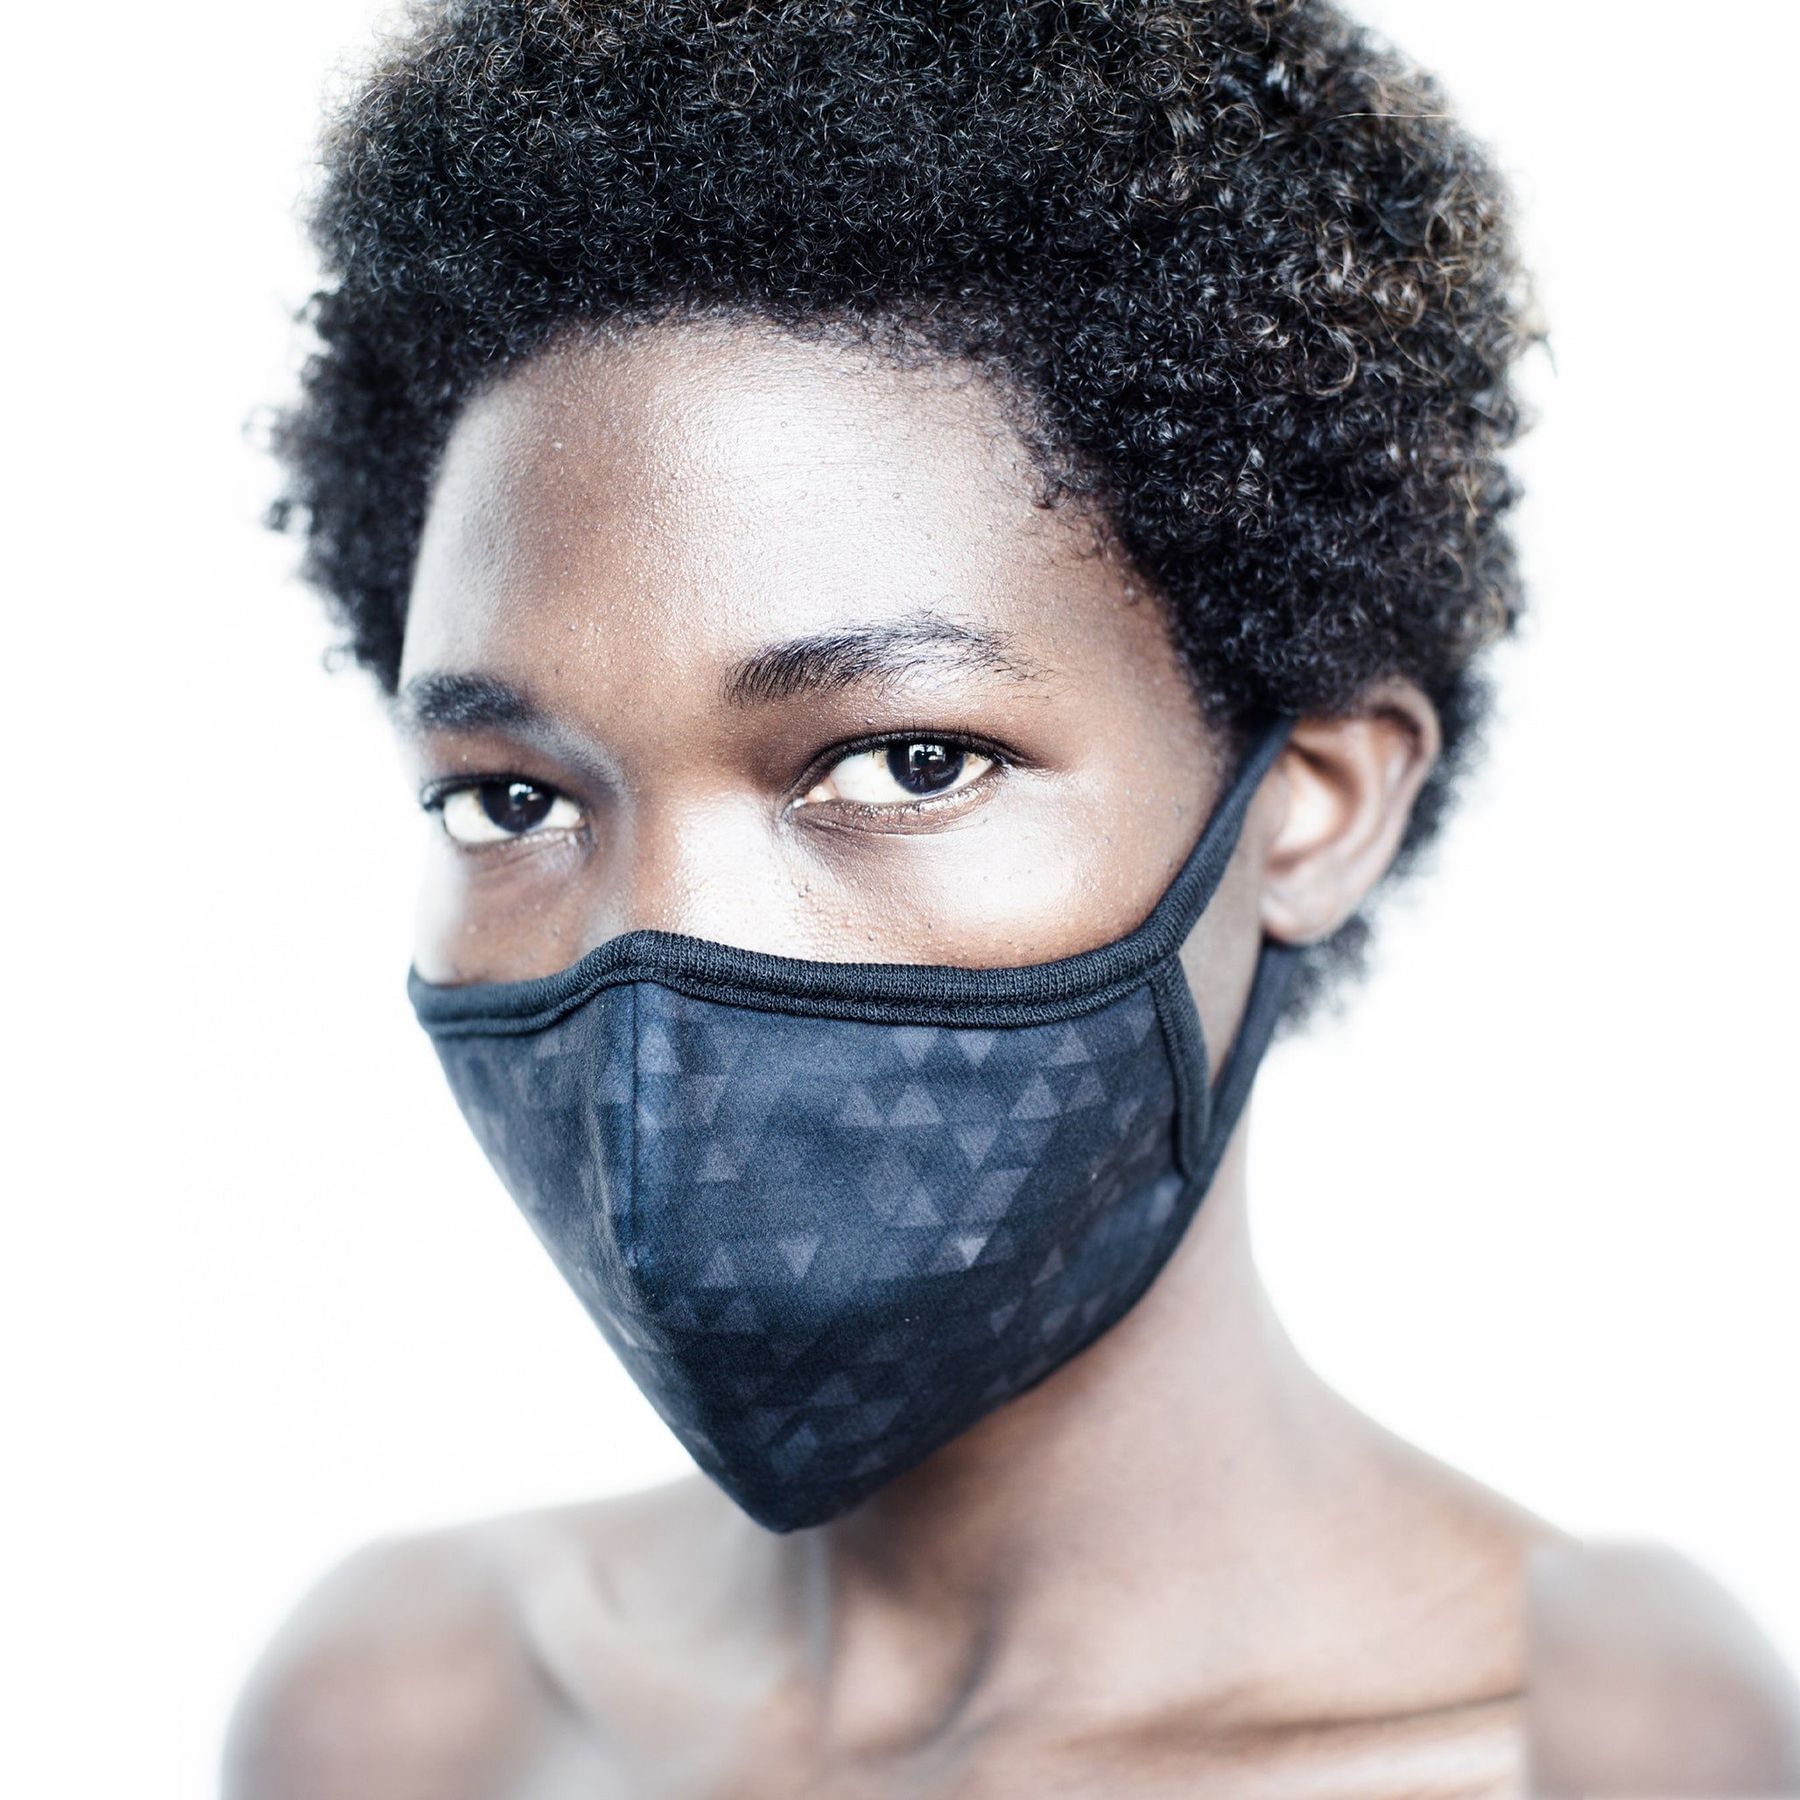 Vogmask - Filtering Face Industry Leader - High Efficiency Particulate Filter - Stylish Face Mask